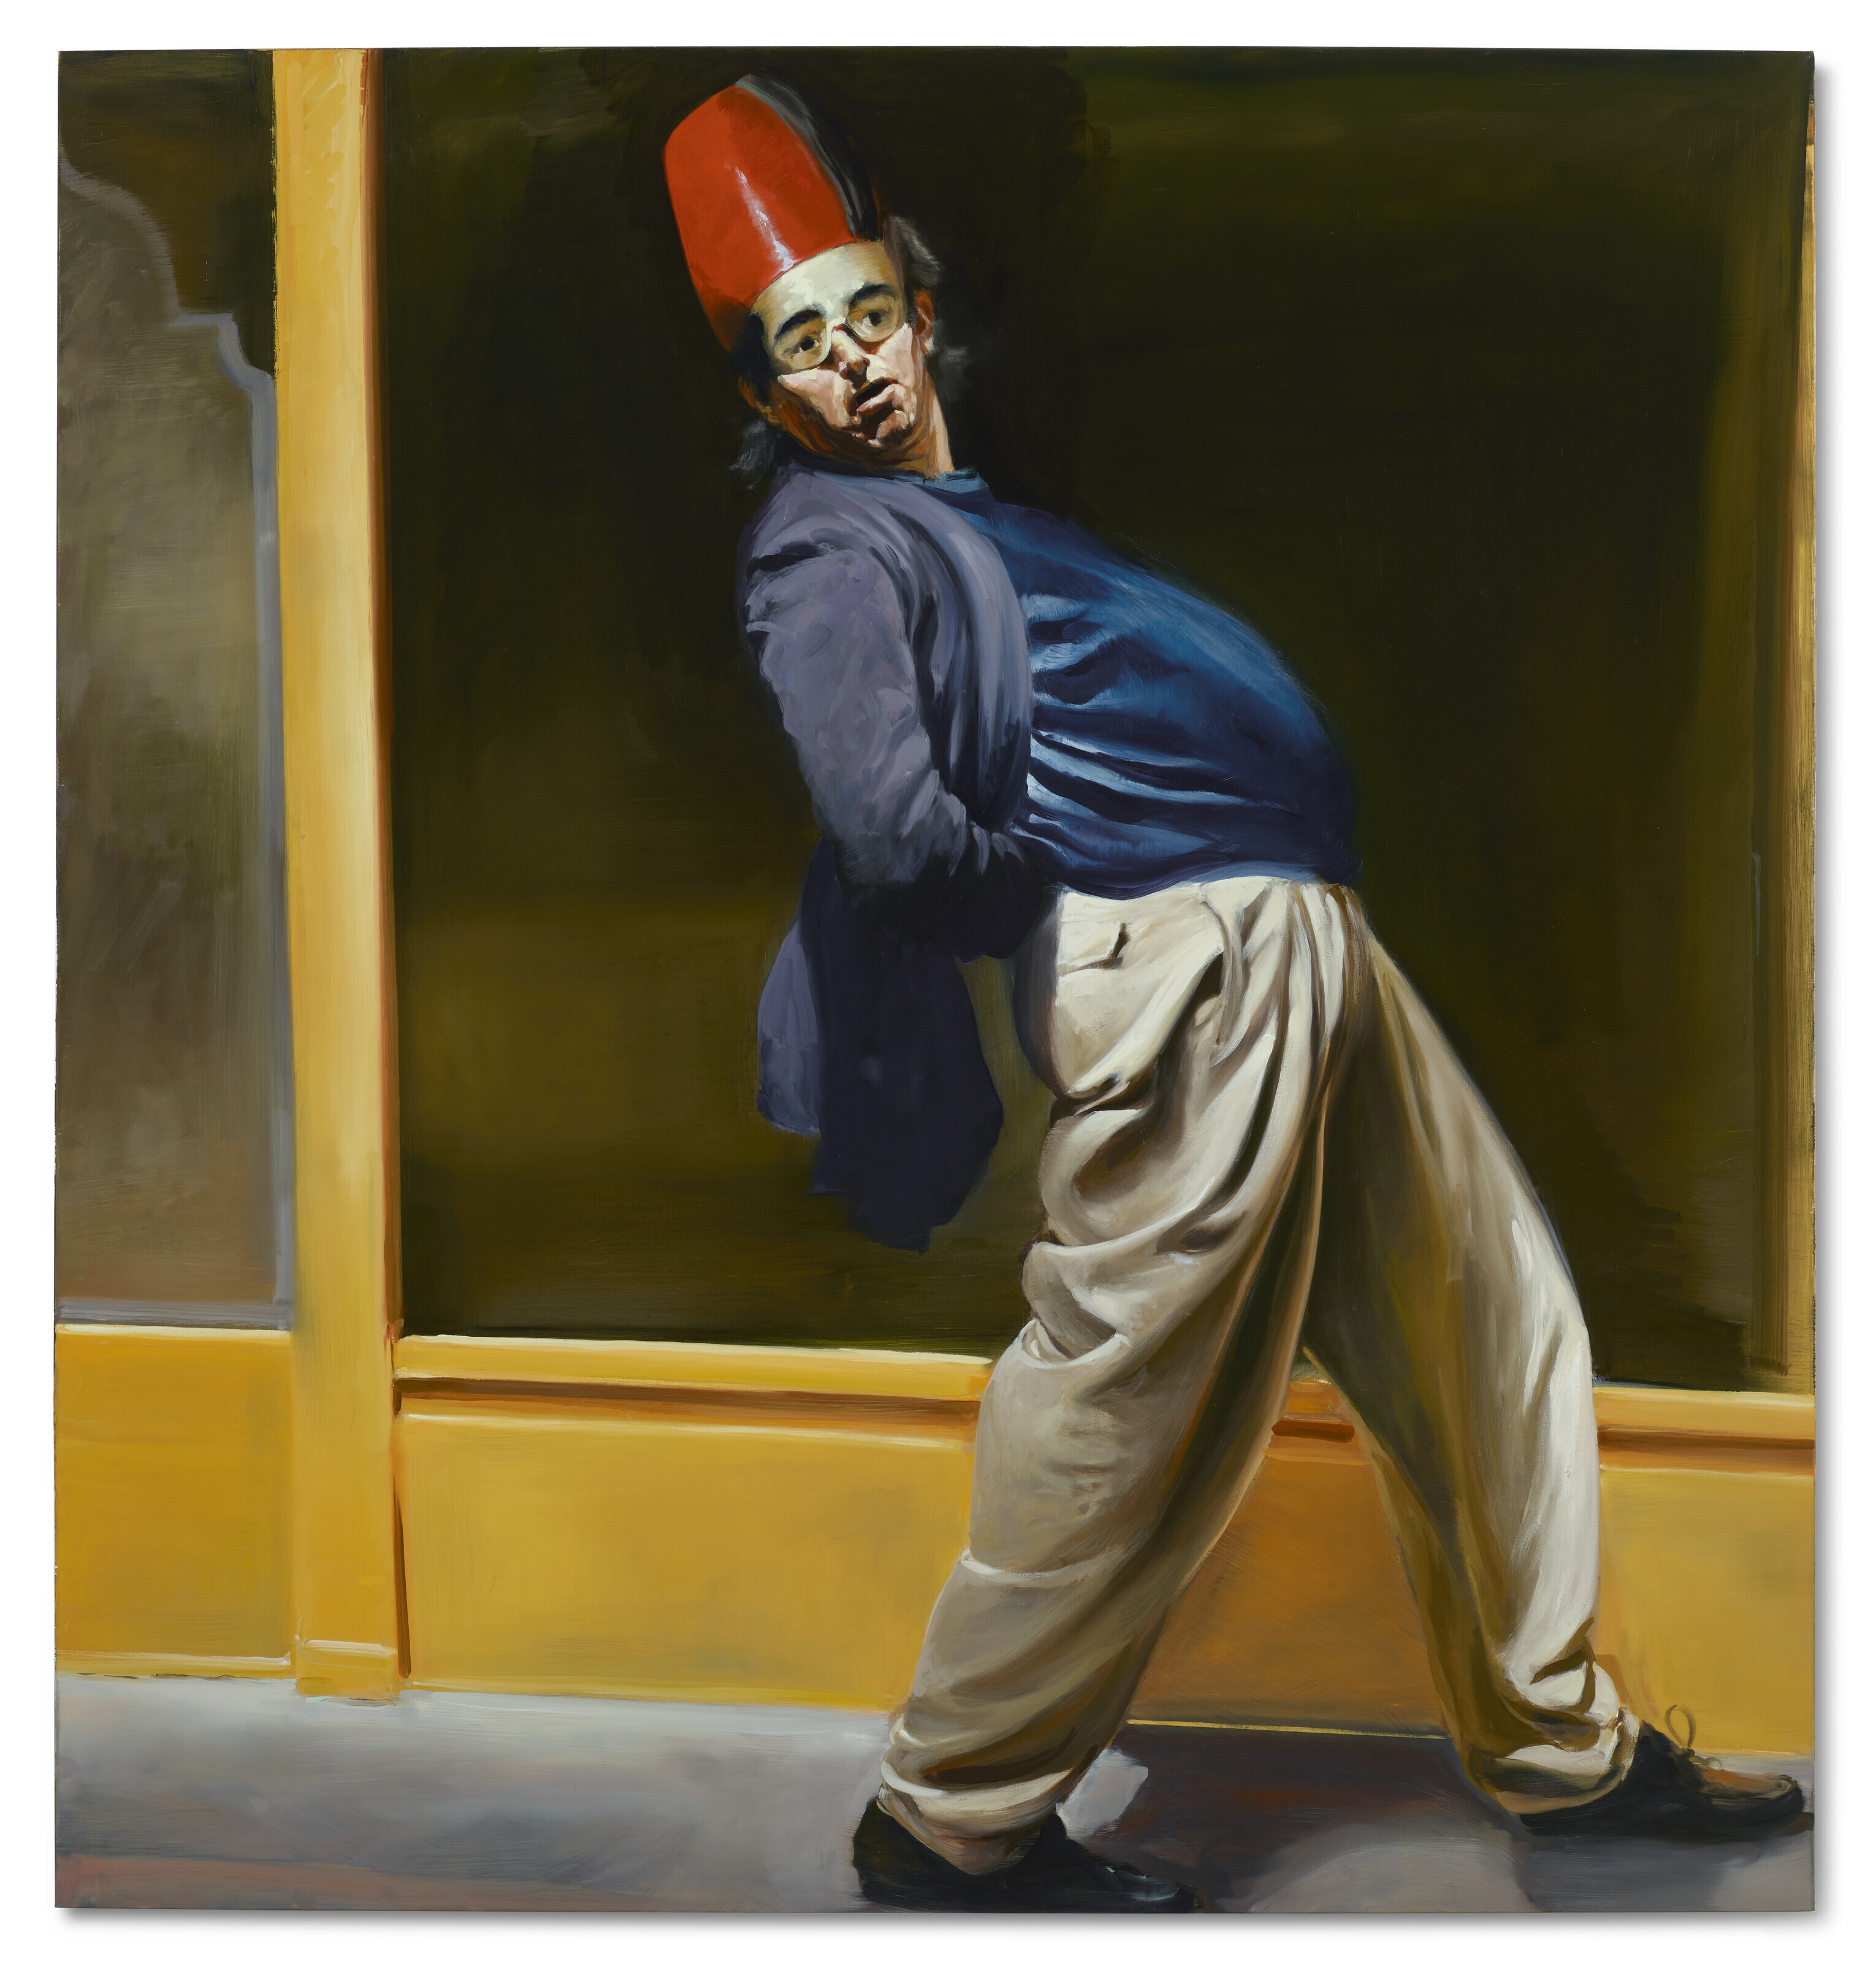 Self-Portrait w/ Mask by Eric Fischl, Painted in 1998